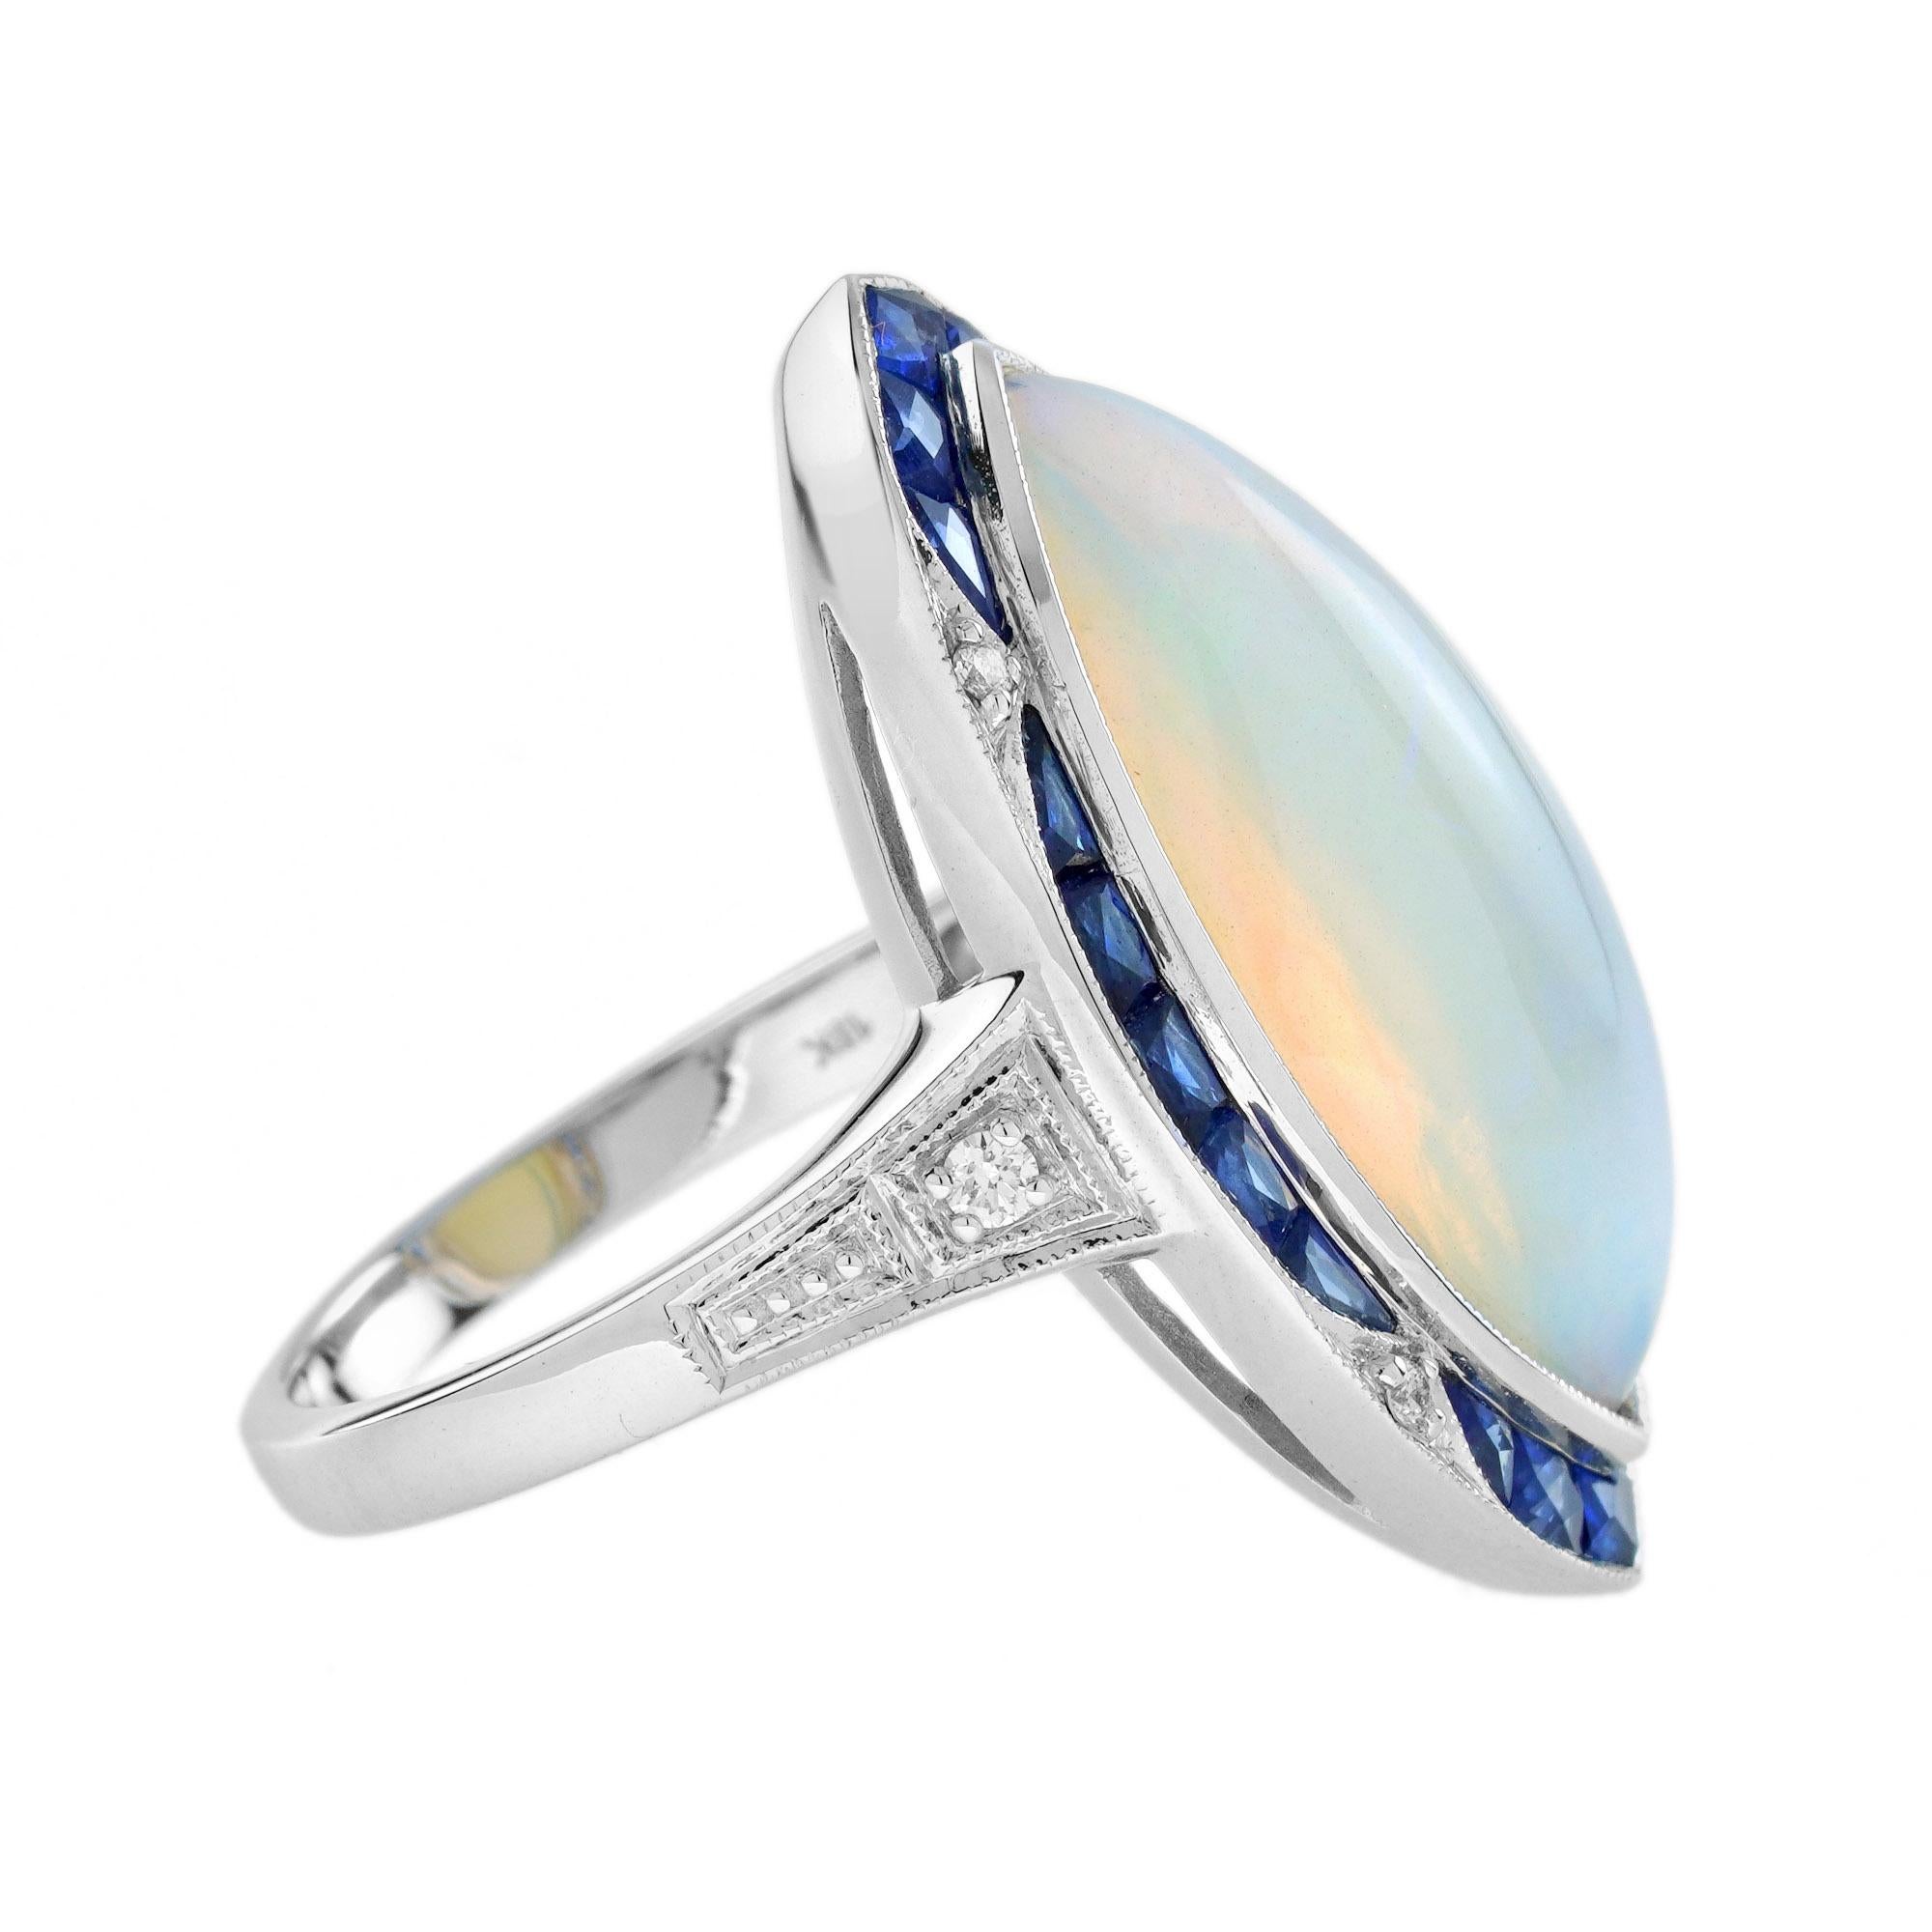 6.55 Ct. Opal Blue Sapphire Diamond Art Deco Style Cocktail Ring in 18K Gold 1